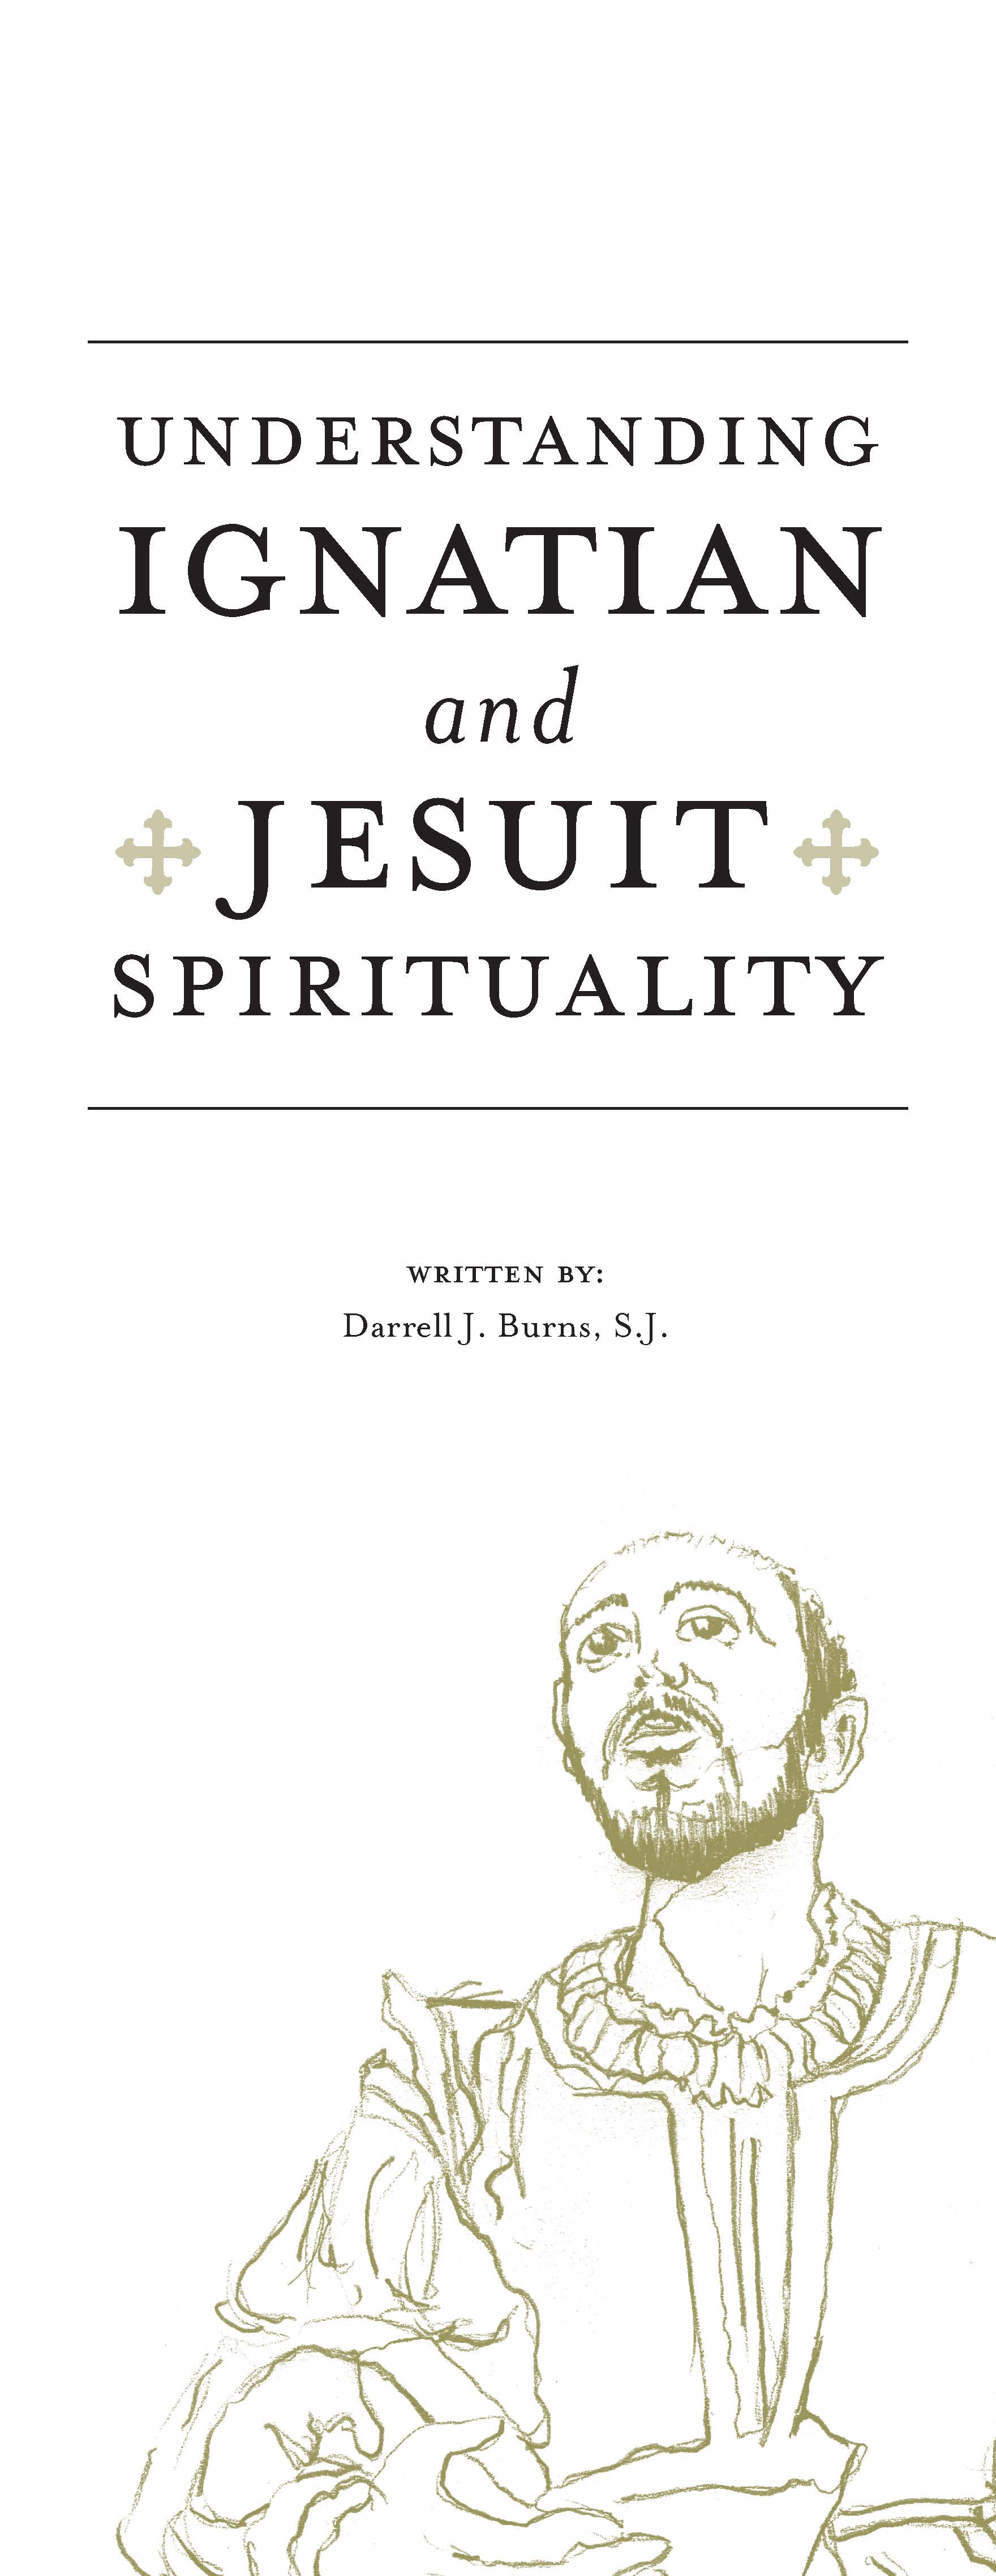 Cover of Understanding Ignatian and Jesuit Spirituality publication